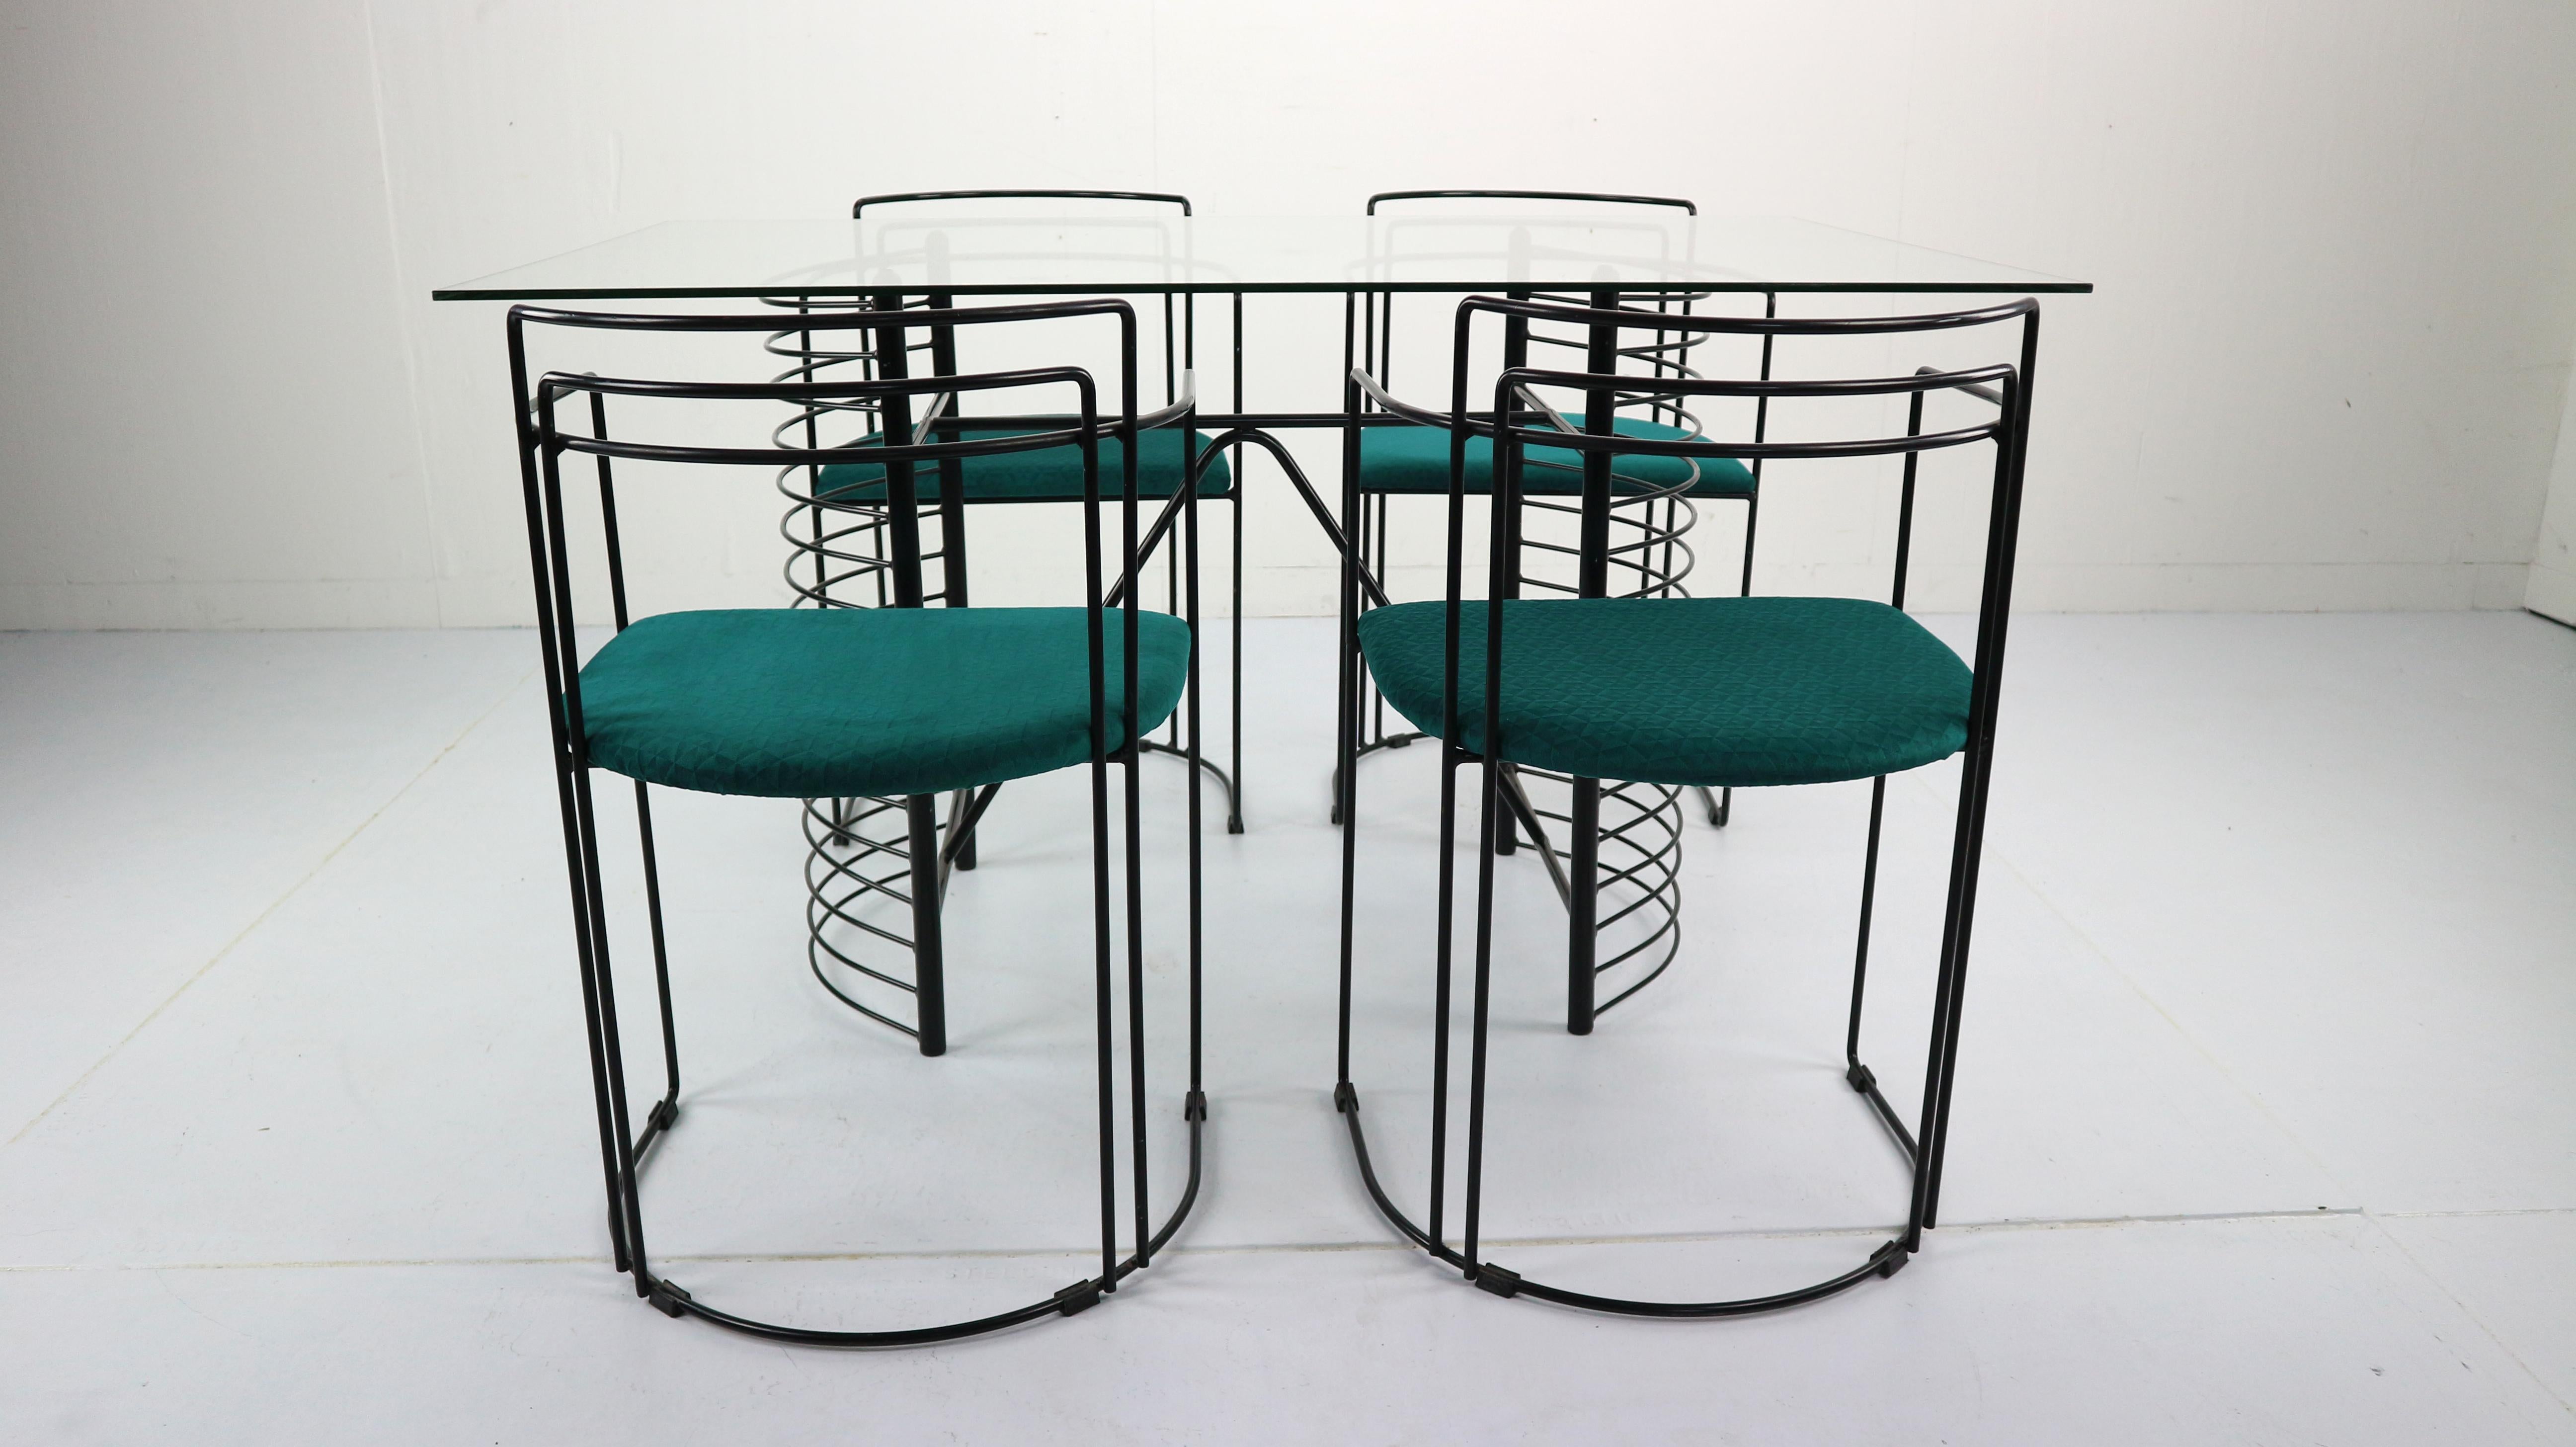 Rare Minimalist and modern design dining room set comes from 1980s Italy. An eyecatcher for your home.
Set comes with glass top dining table and four chairs.
Chairs are made from black wire and satin petrol color fabric.
Dining table measurement: